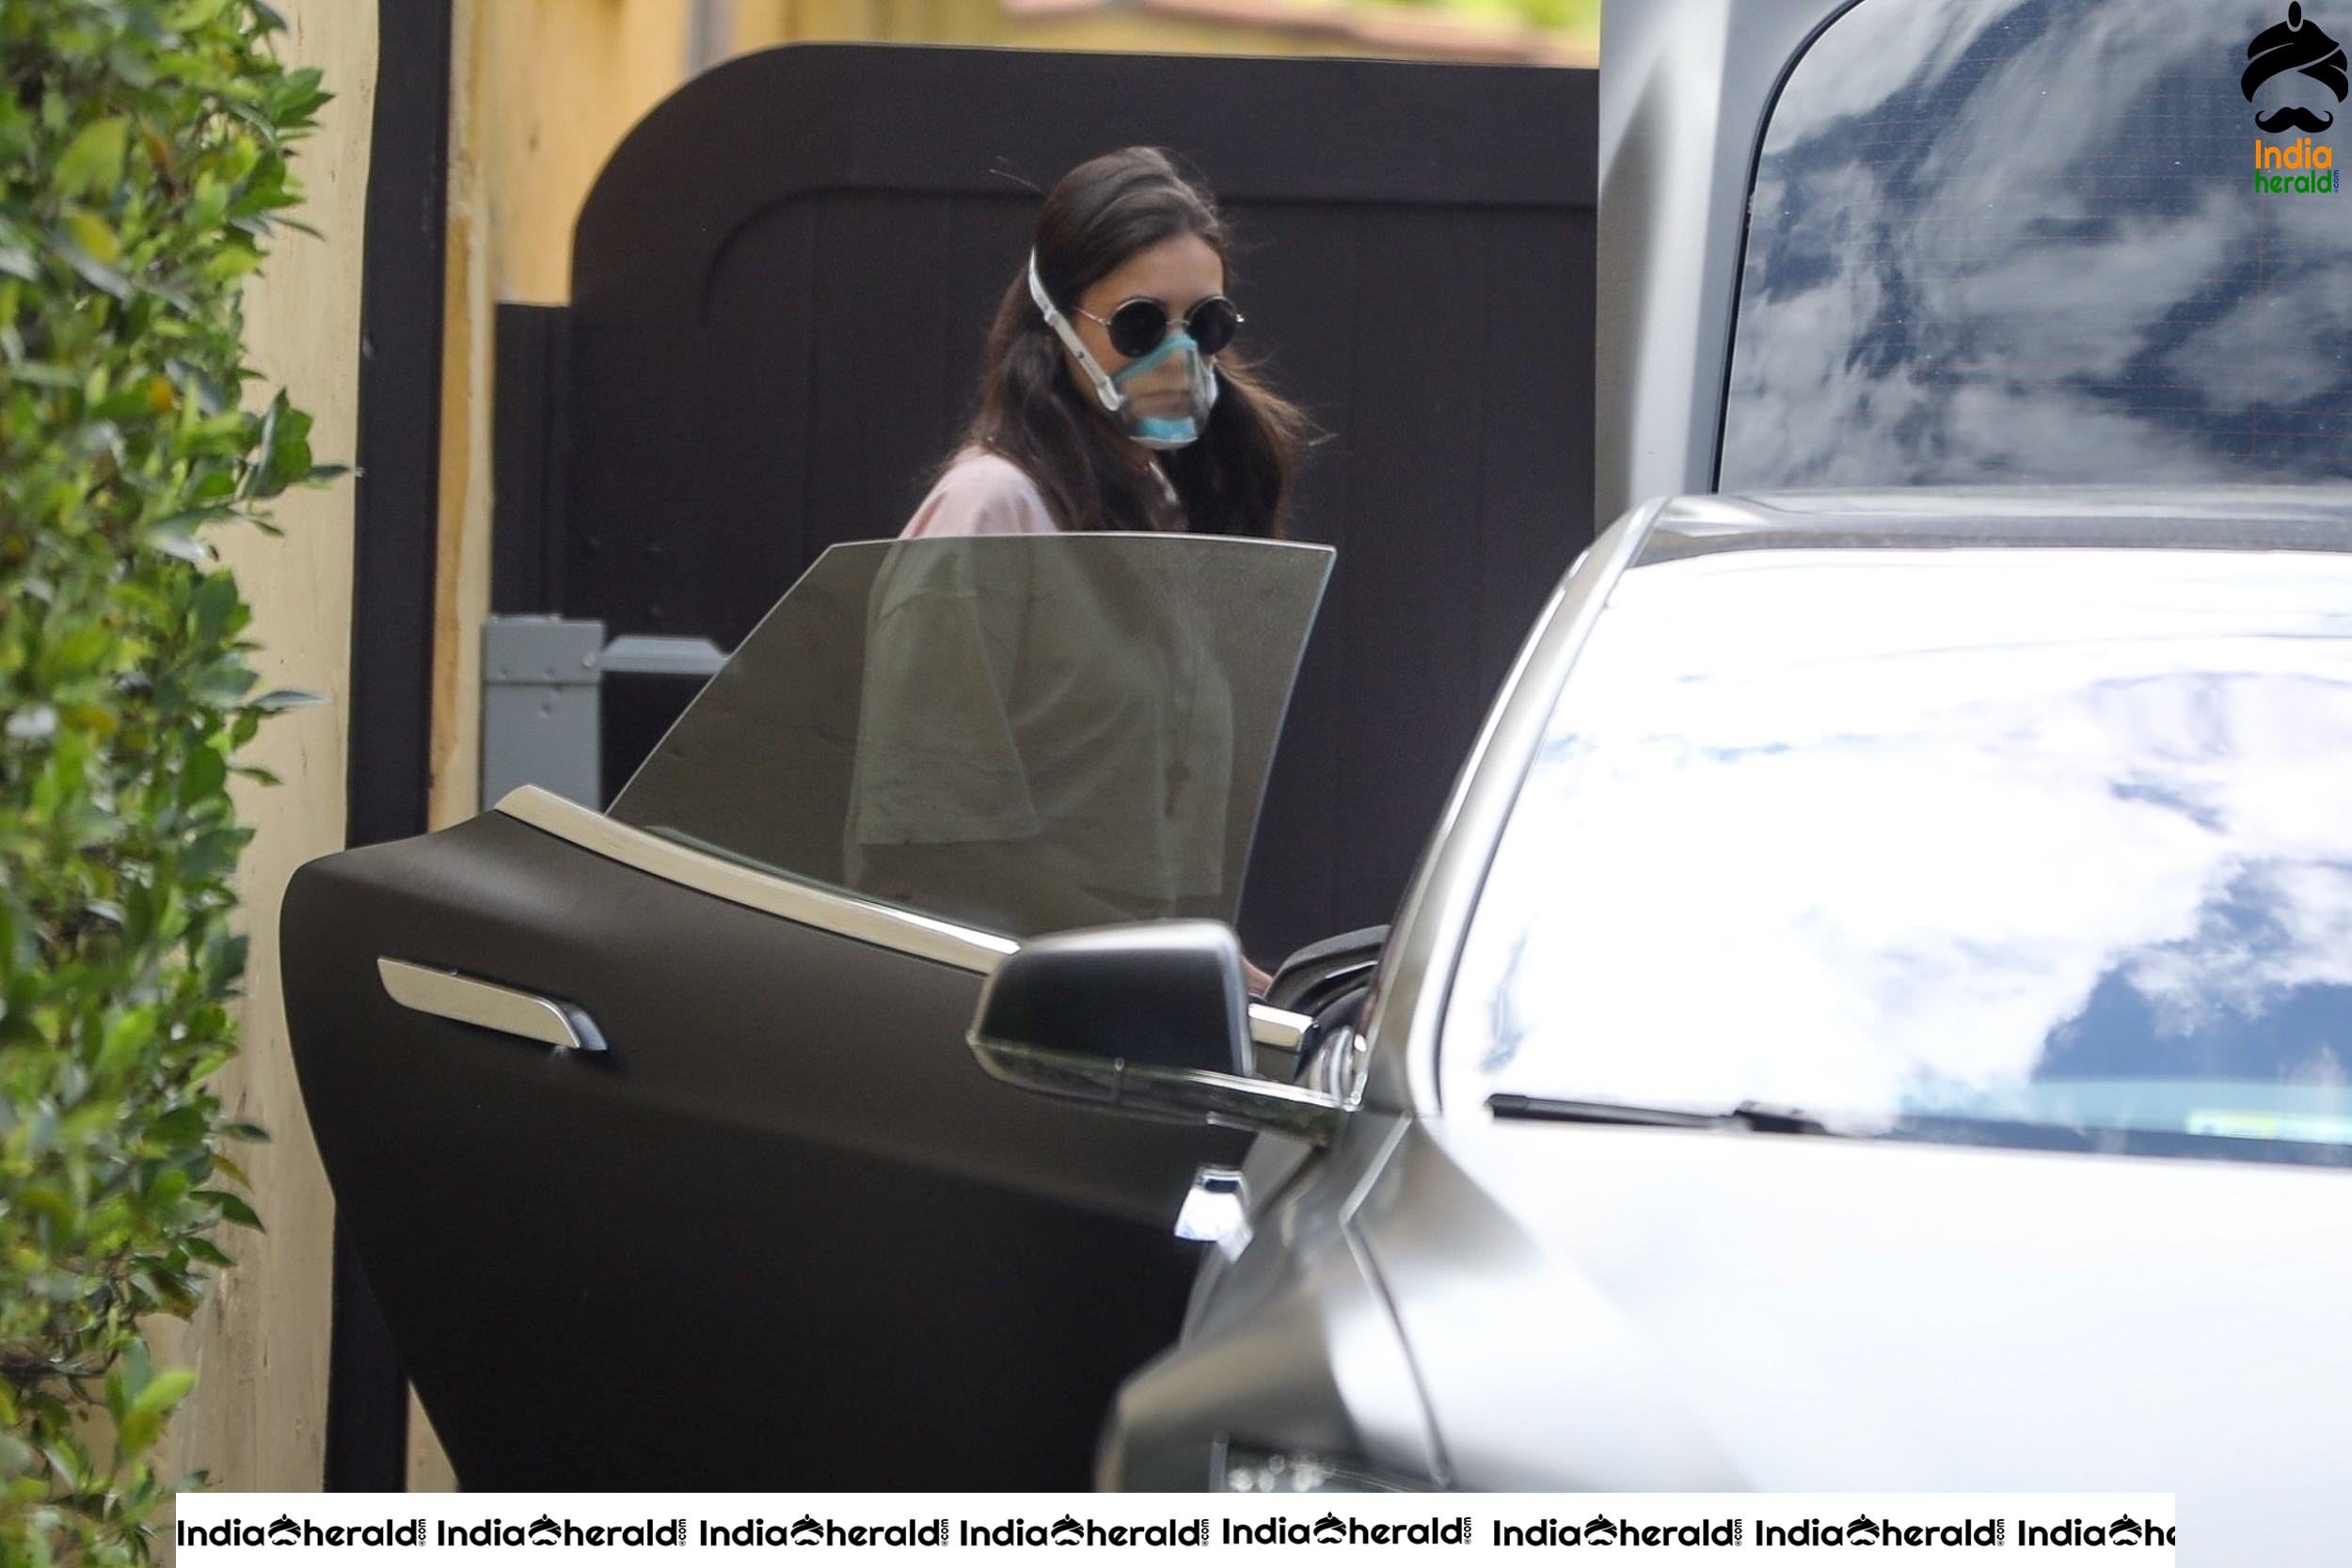 Nina Dobrev Out wearing a surgical mask due to Corona Virus in Los Angeles